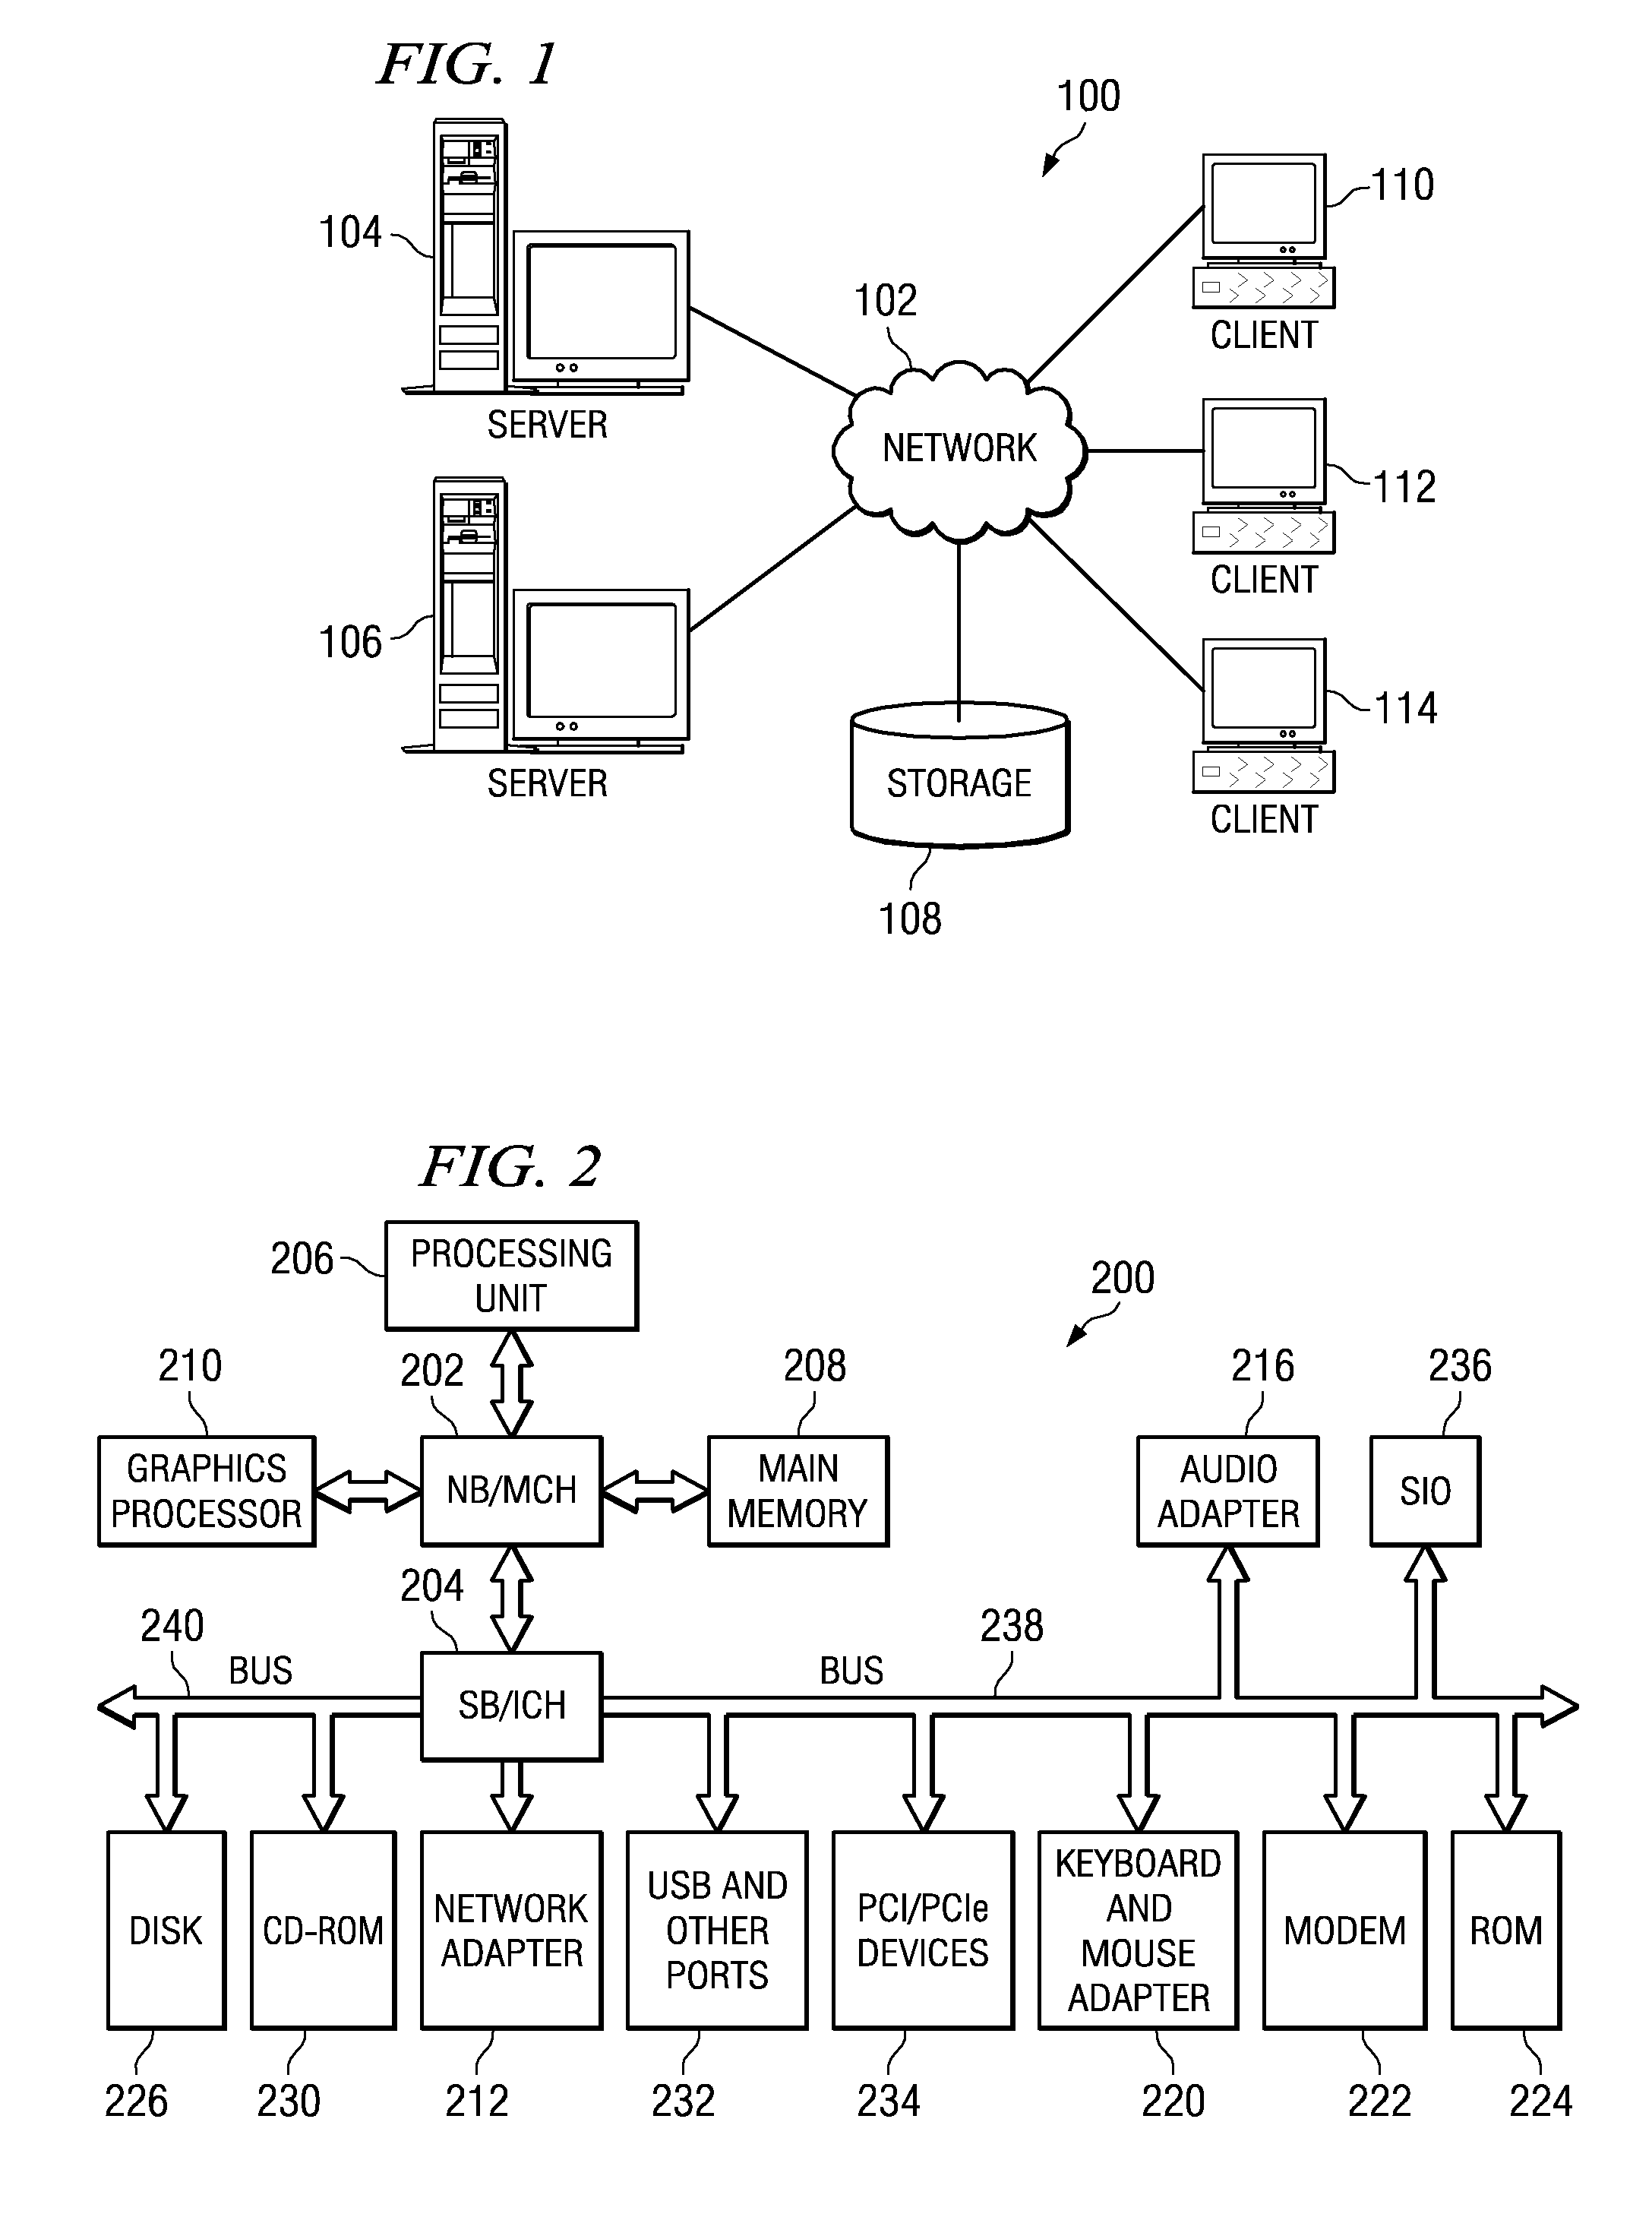 Method for notarizing packet traces